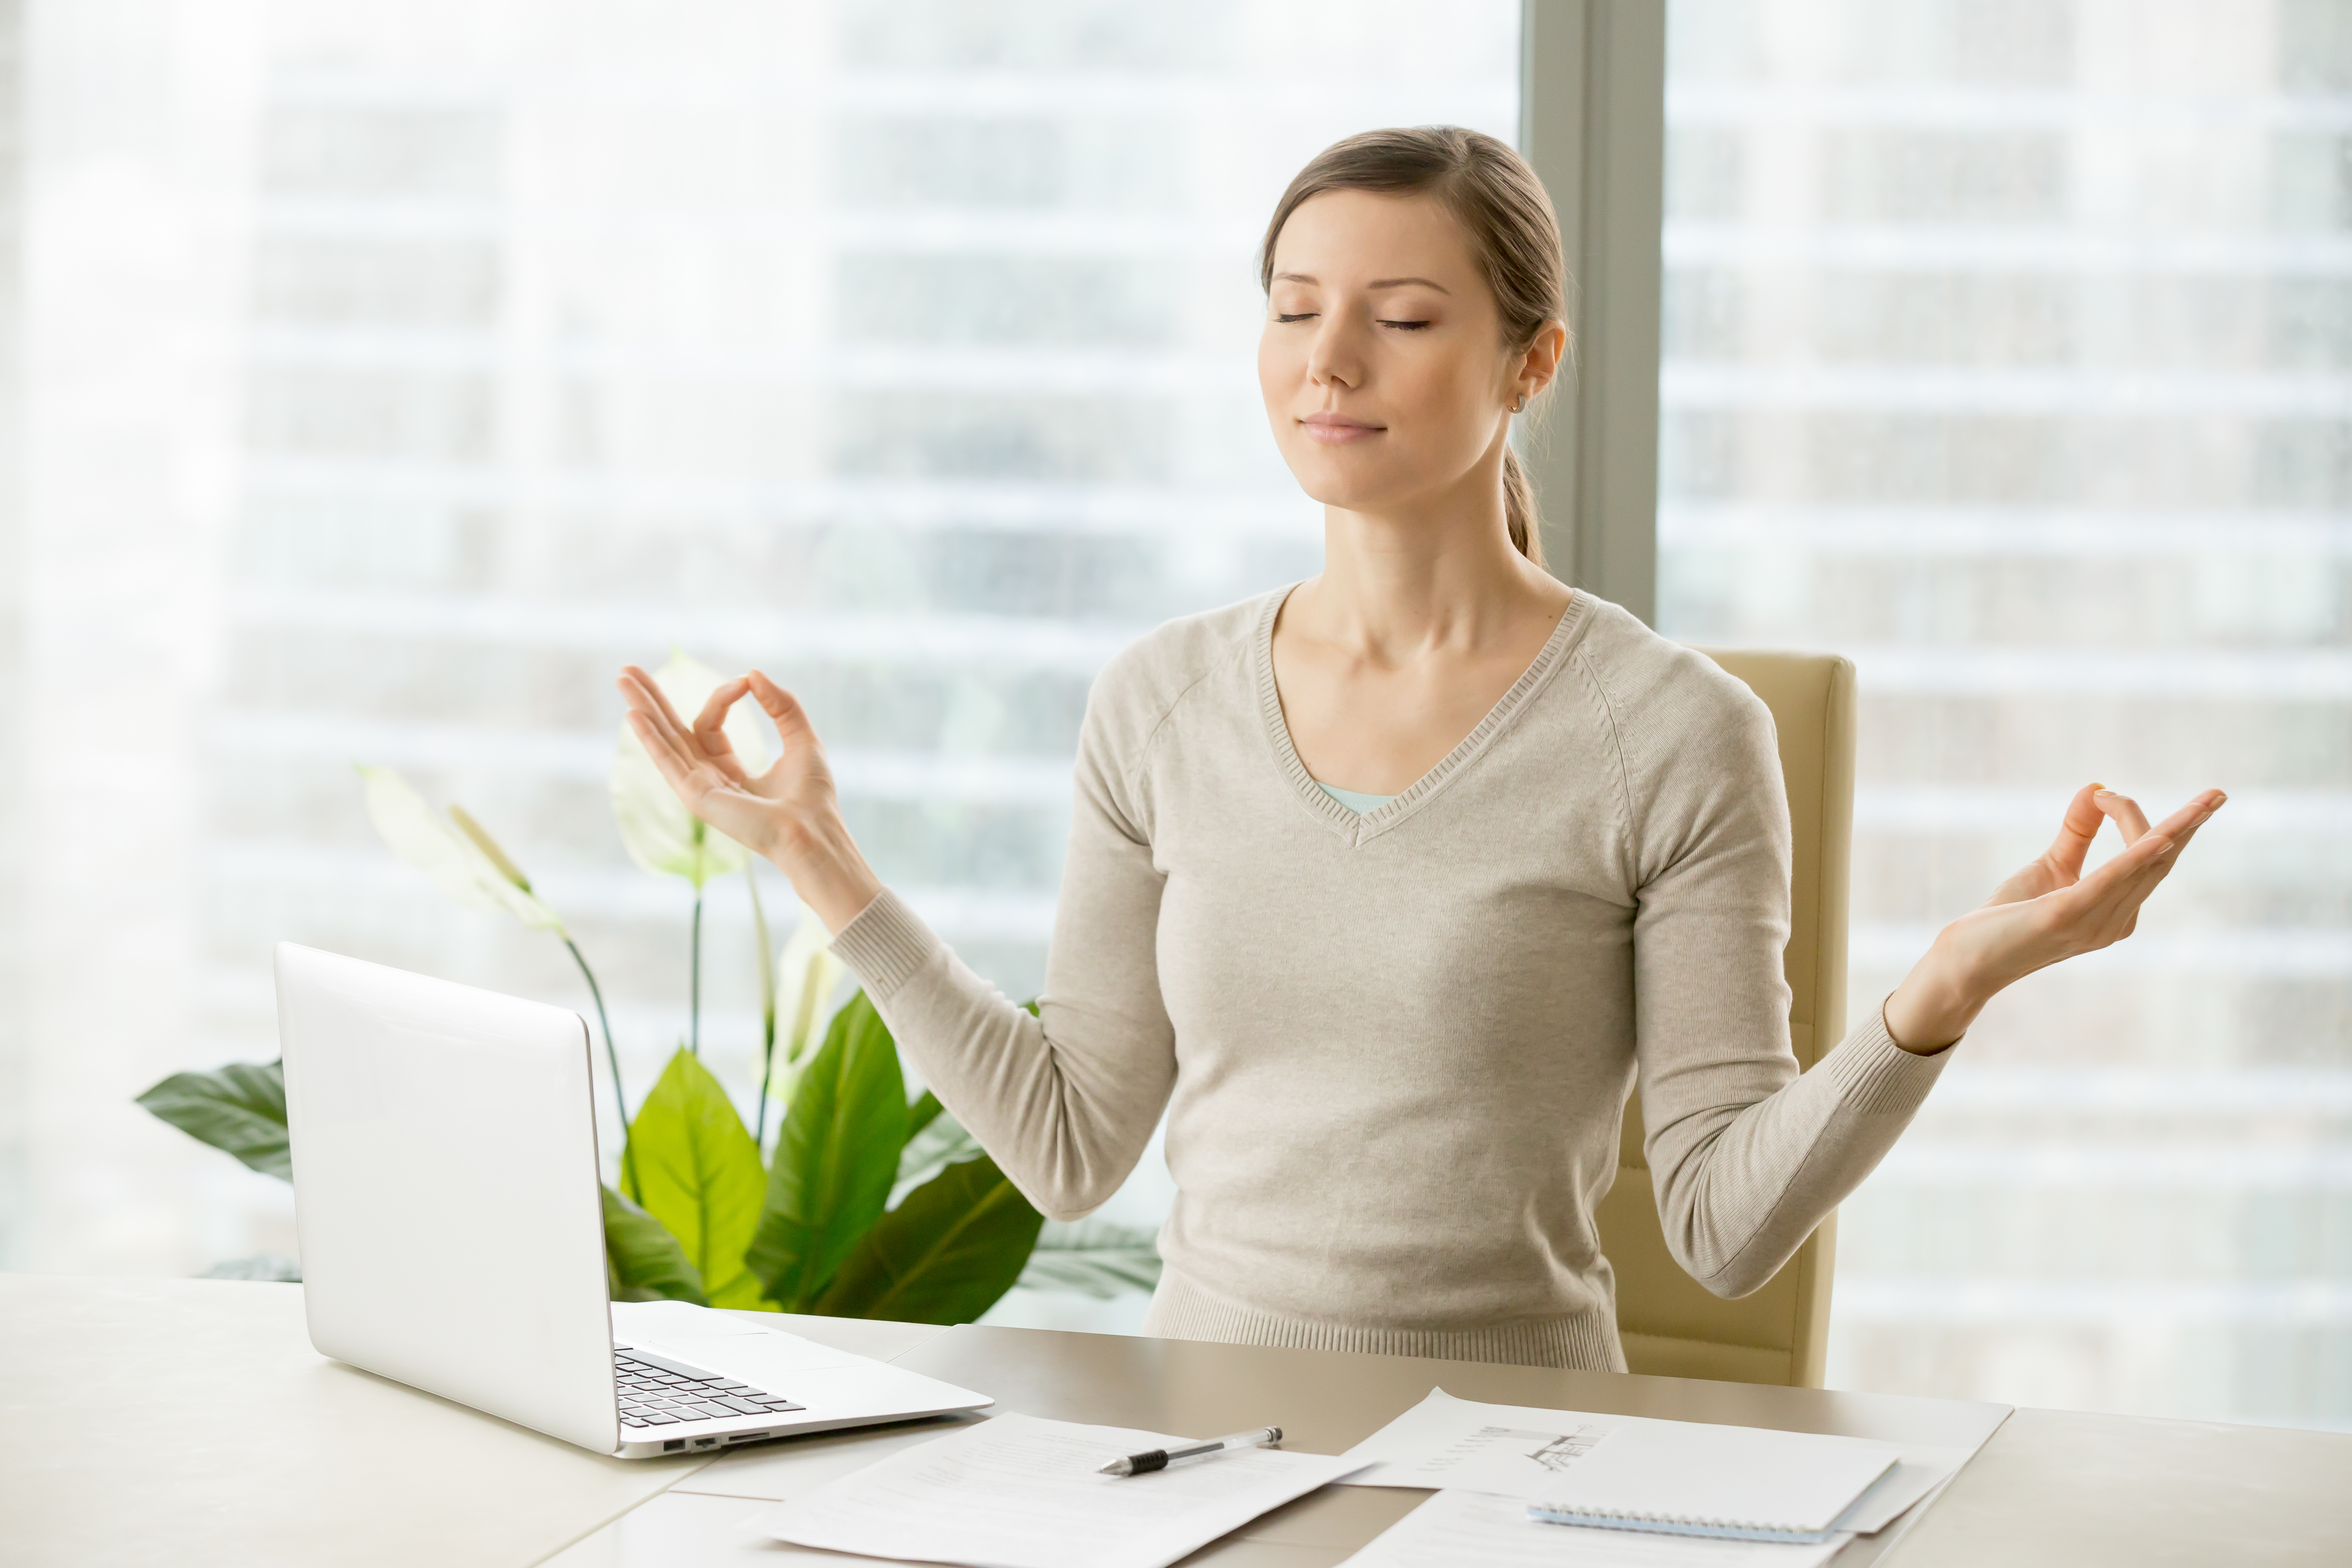 Relaxed woman meditating at workplace, practicing eastern spiritual practices for stress relief and mental health while sitting at desk in front of laptop. Short break in work for strength recovery